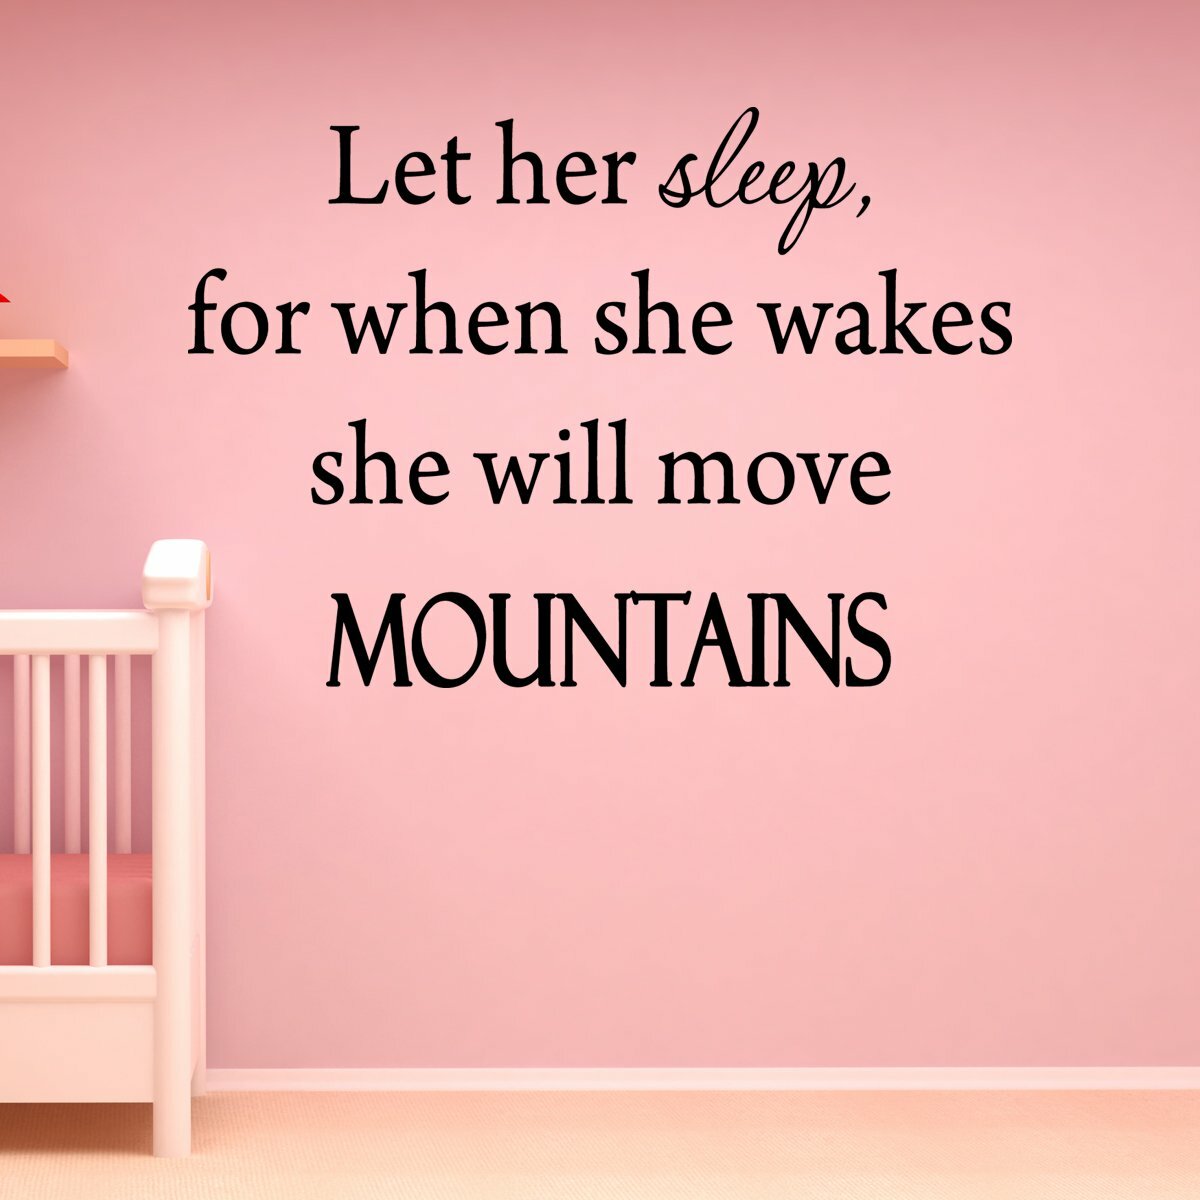 pink nursery decor Carved Let Her Sleep for in the Morning She Will Move Mountains sign FREE SHIPPING in the USA girls room decor